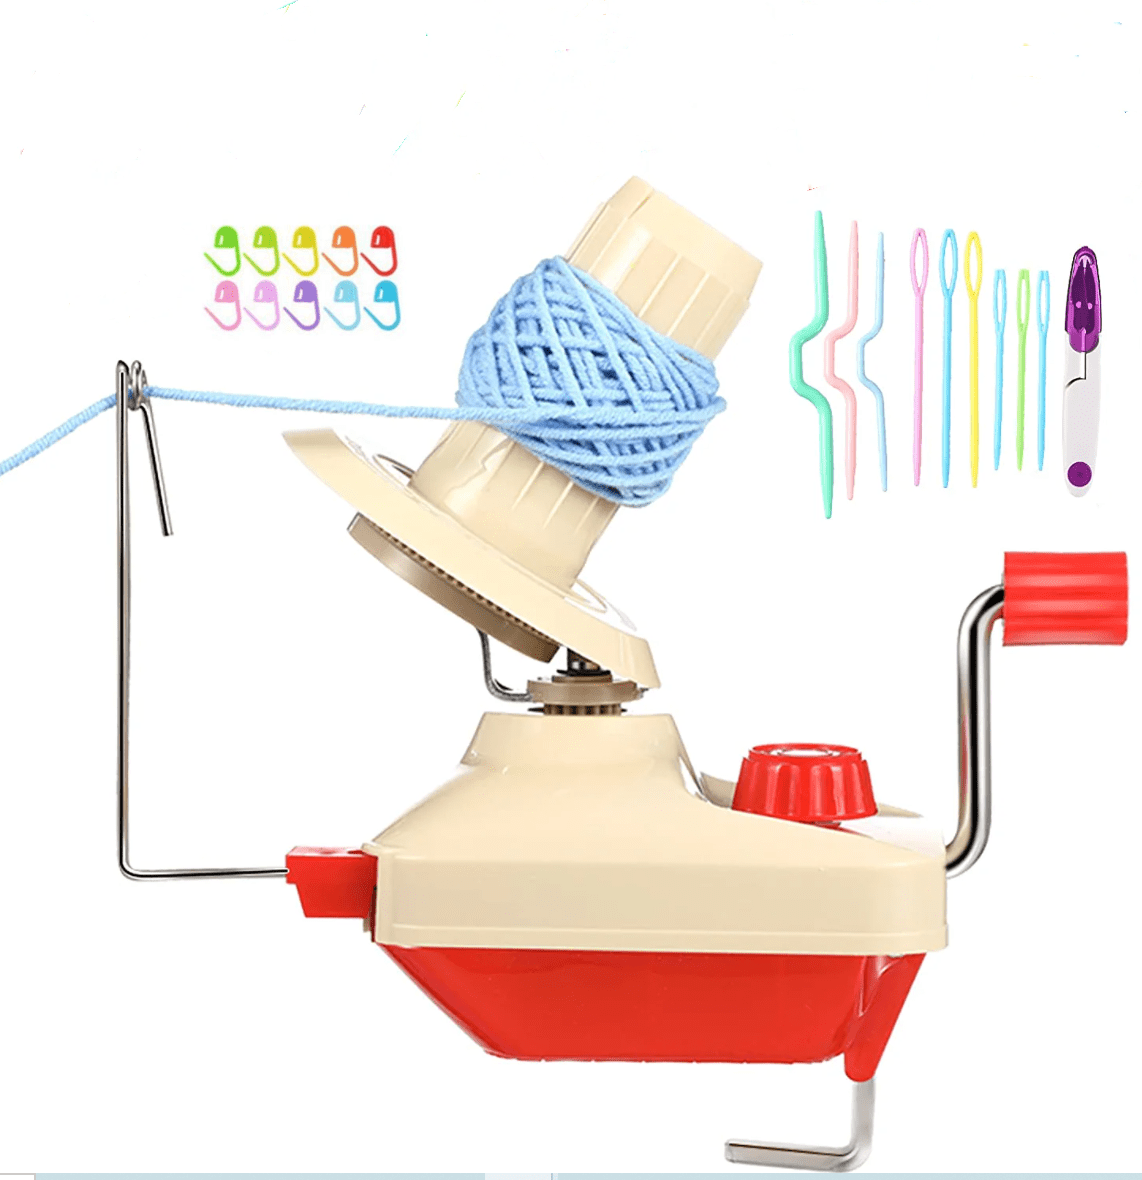 Yarniss Yarn Cake Ball Winder, Hand Operated Yarn Winder 4 Ounce Capacity  Blue,Valentines Day Gifts